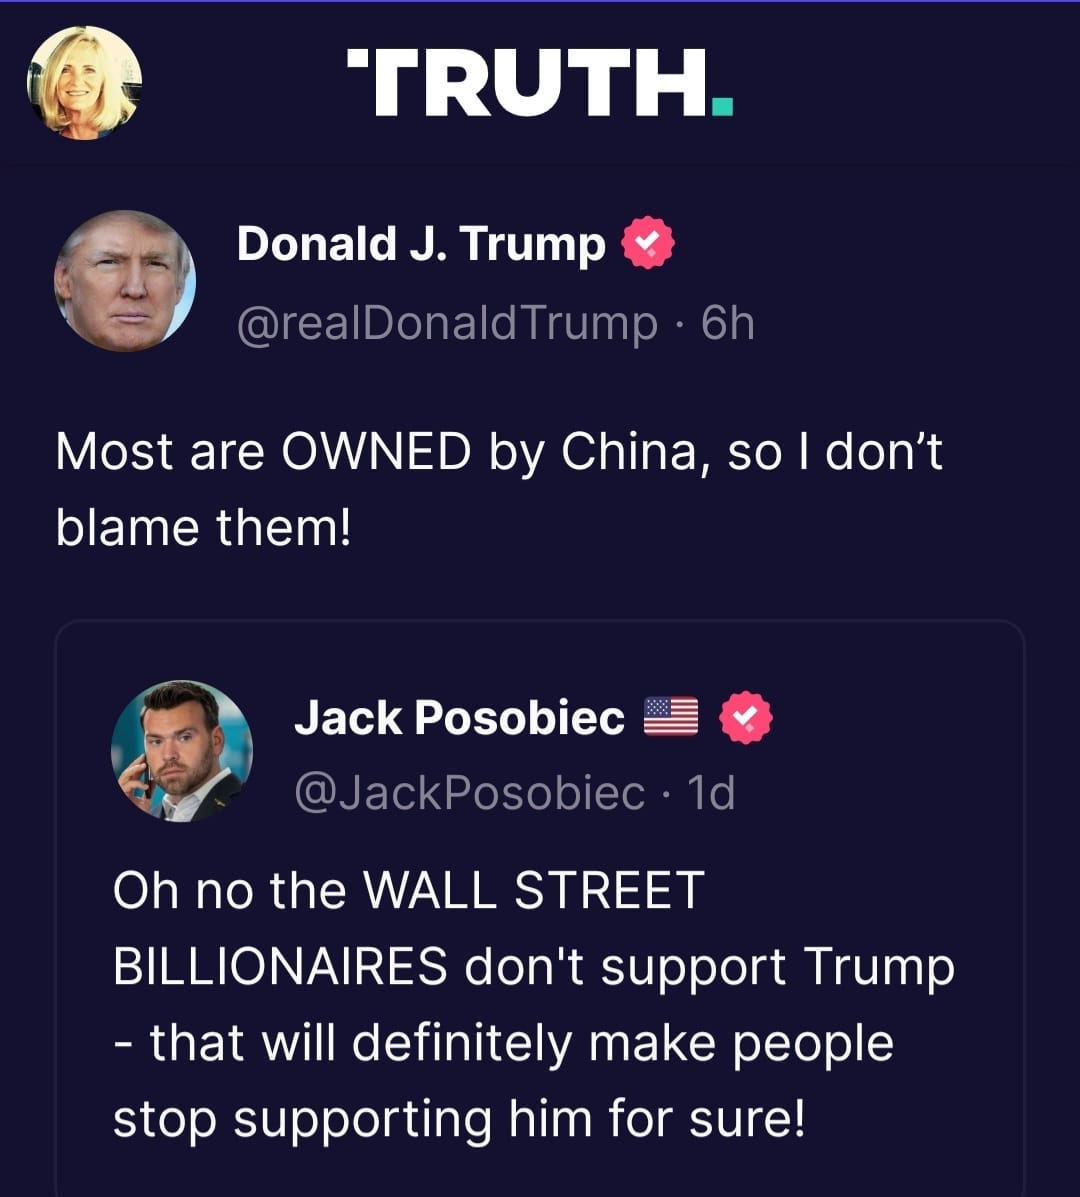 May be a Twitter screenshot of 3 people and text that says 'TRUTH. Donald J. Trump @realDonaldTrump 6h Most are OWNED by China, so I don't blame them! Jack Posobiec @JackPosobiec 1d Oh no the WALL STREET BILLIONAIRES don't support Trump -that will definitely make people stop supporting him for sure!'